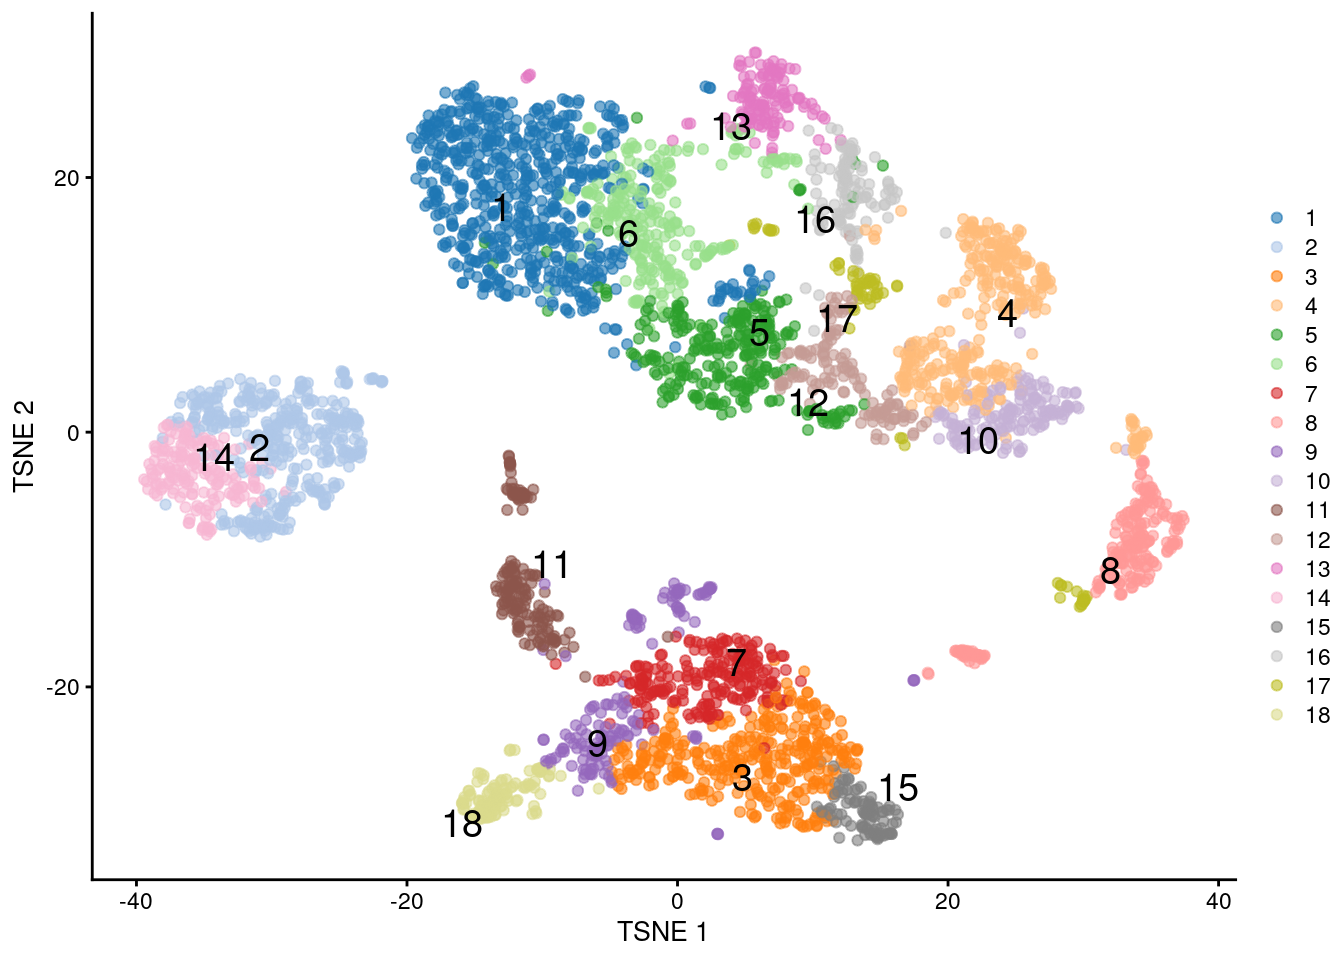 $t$-SNE plot of the PBMC dataset, where each point represents a cell and is coloured according to the identity of the assigned cluster from combined $k$-means/hierarchical clustering.